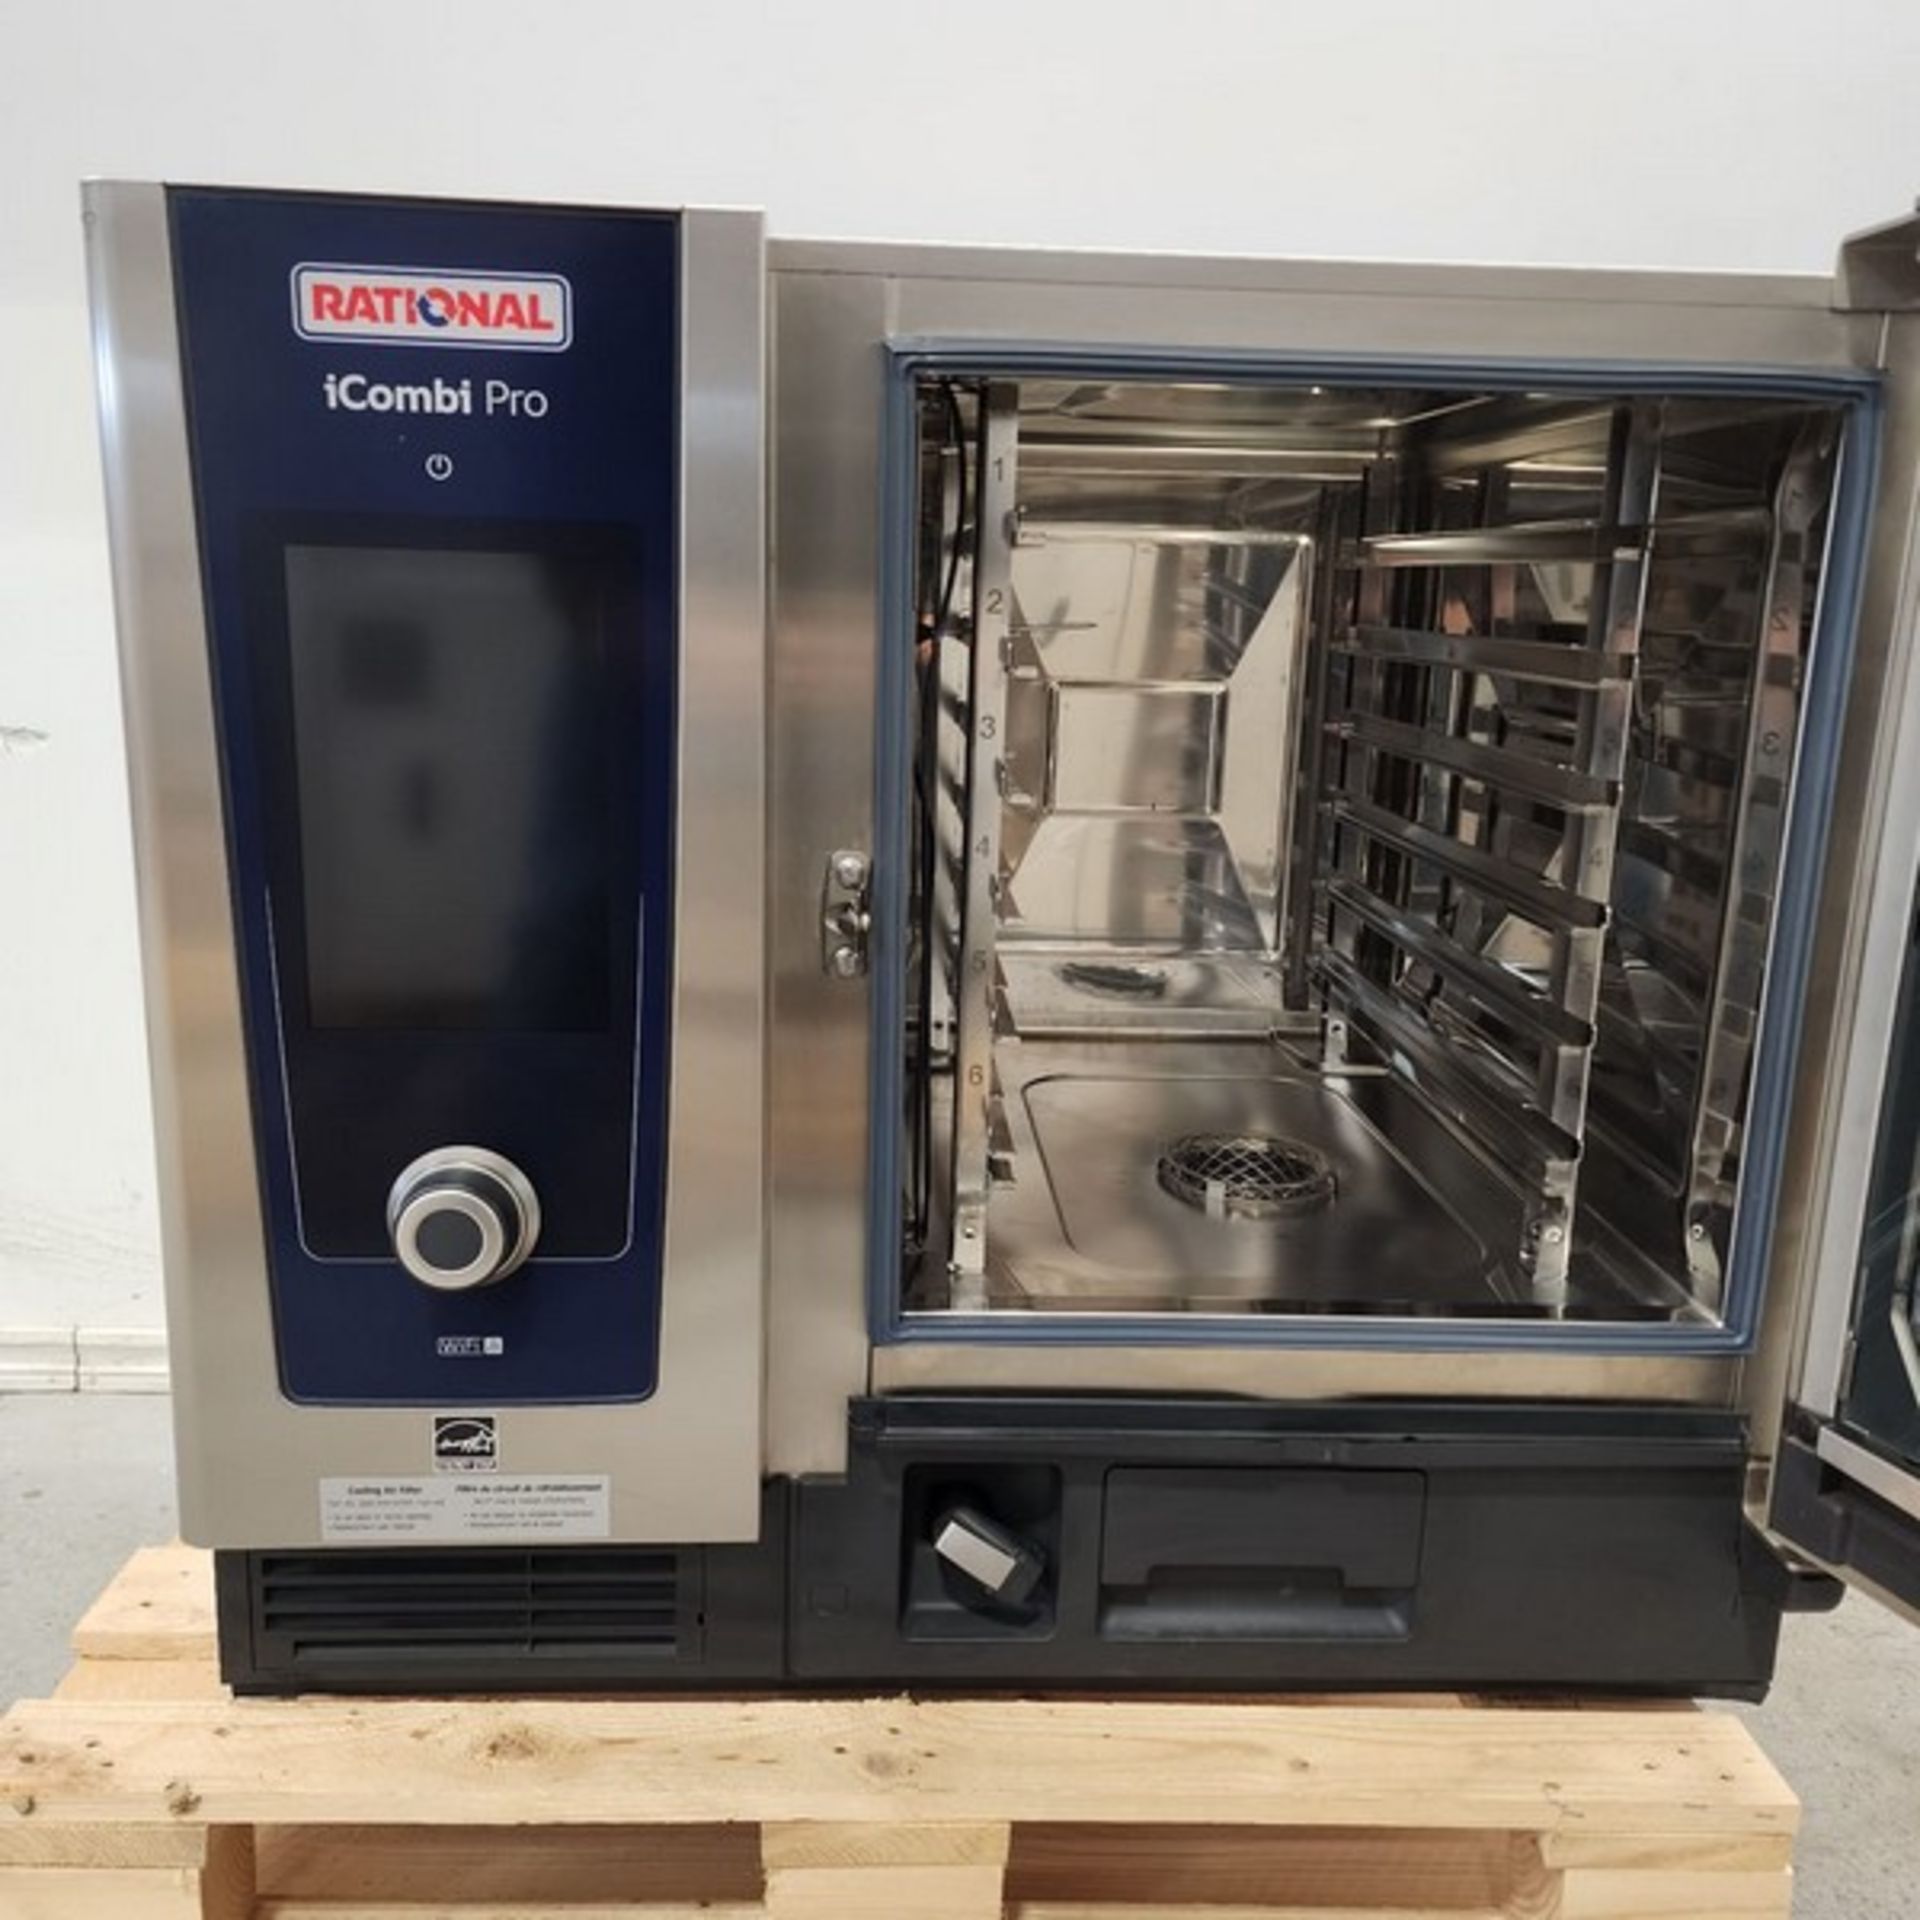 Rational Oven 480 v 3 phase brand new icombi pro new condition (Item #103R) (simple loading Fee $ - Image 3 of 7